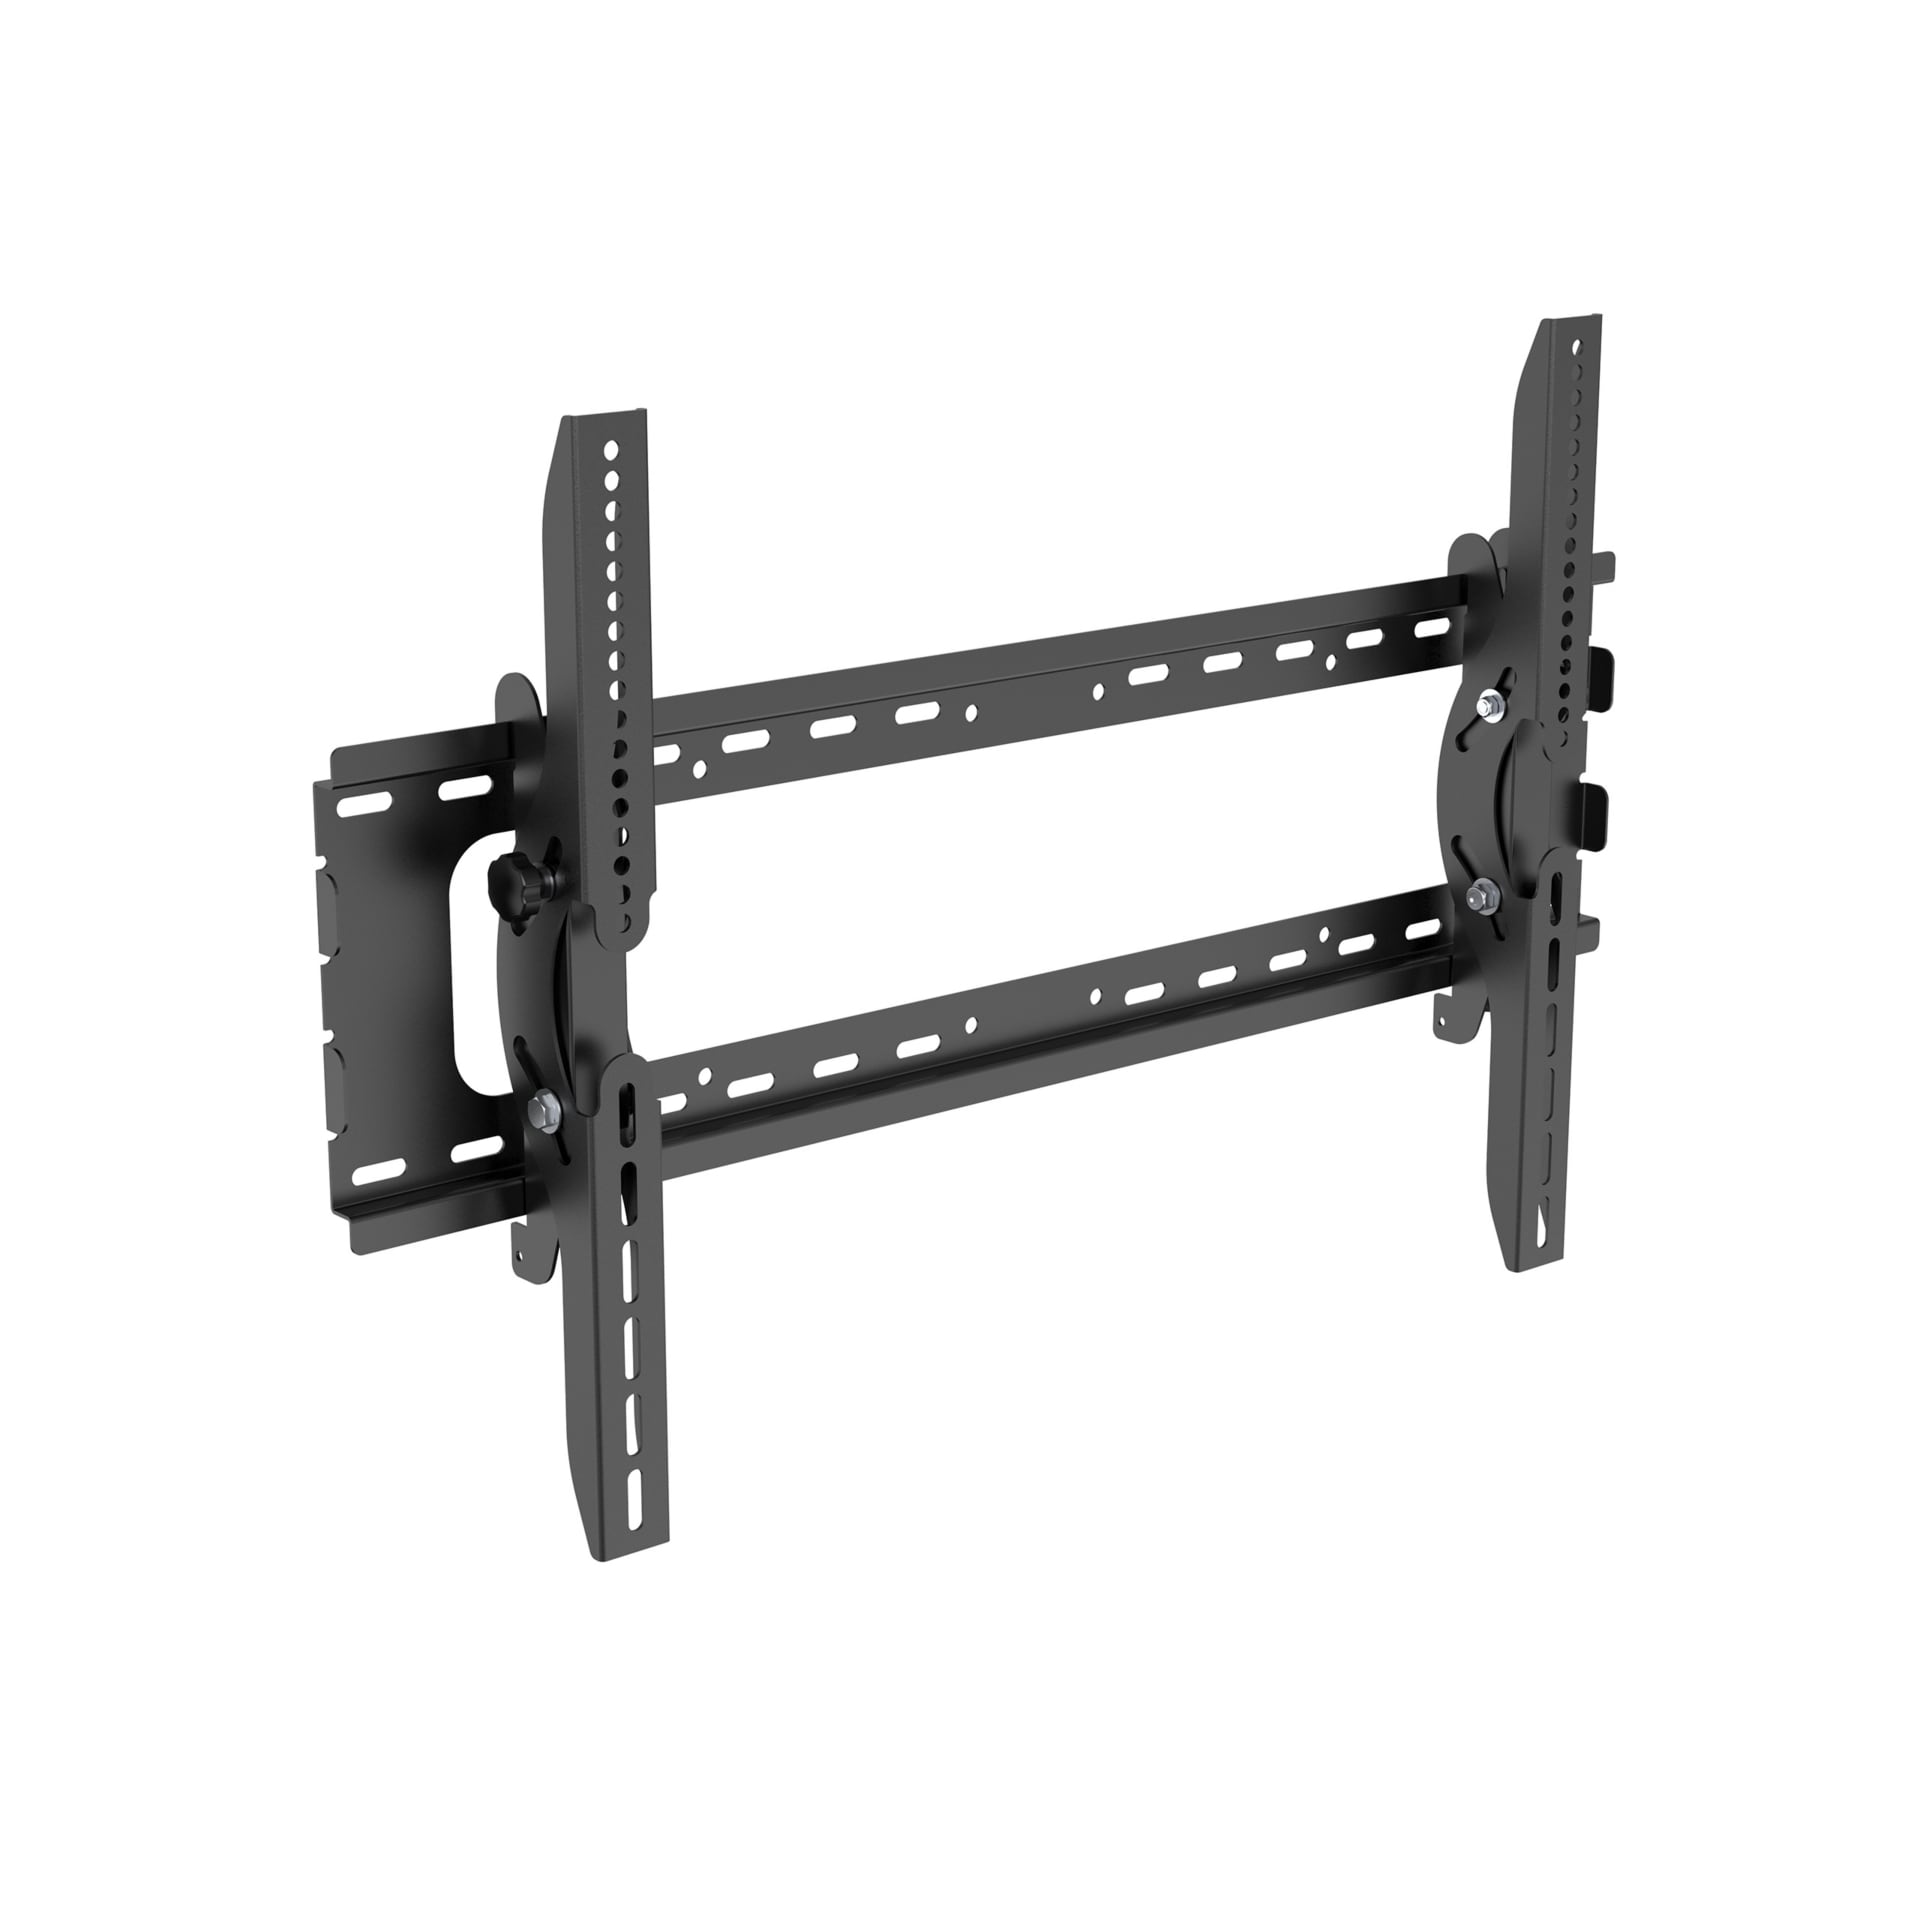 Mount-it! Tv Wall Mount Monitor Bracket With Full Motion Articulating Tilt  Arm, 15 Extension Arm Fits 17 - 47 Inch Tvs, Vesa 200x200 : Target